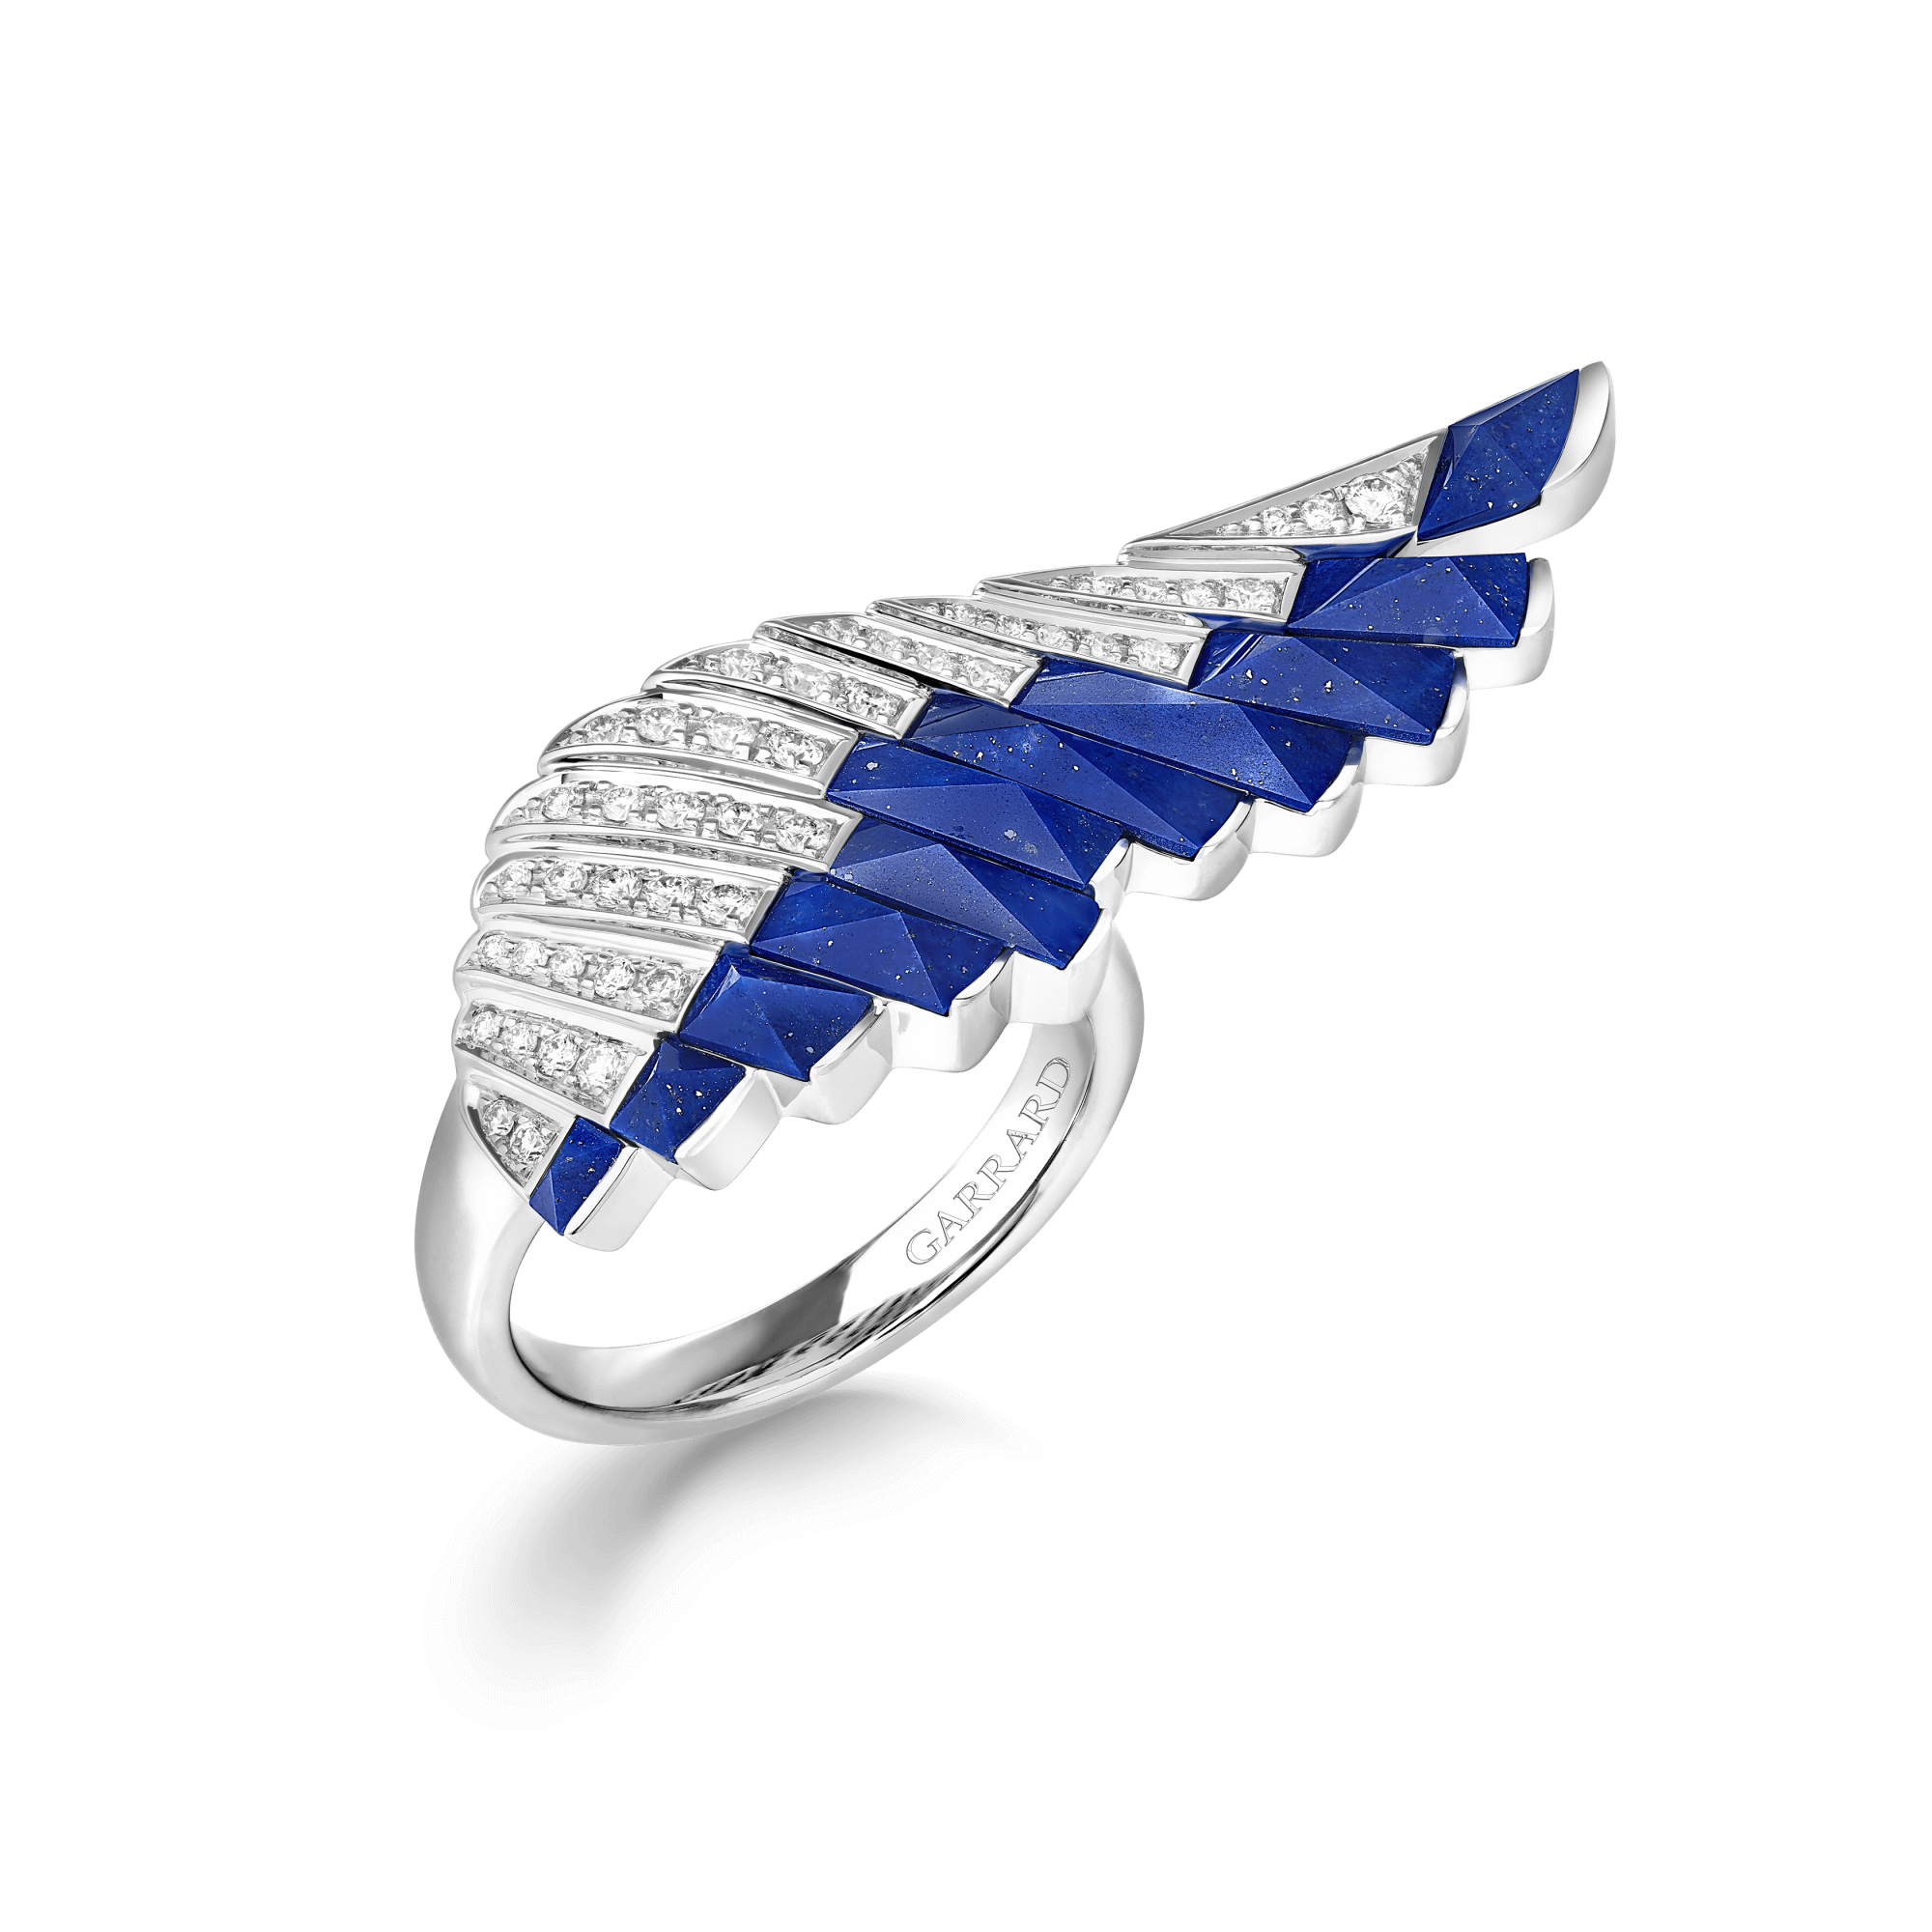 Garrard Wings Rising collection Ring in 18ct White Gold with Diamonds and Lapis Lazuli 2018628 Hero View